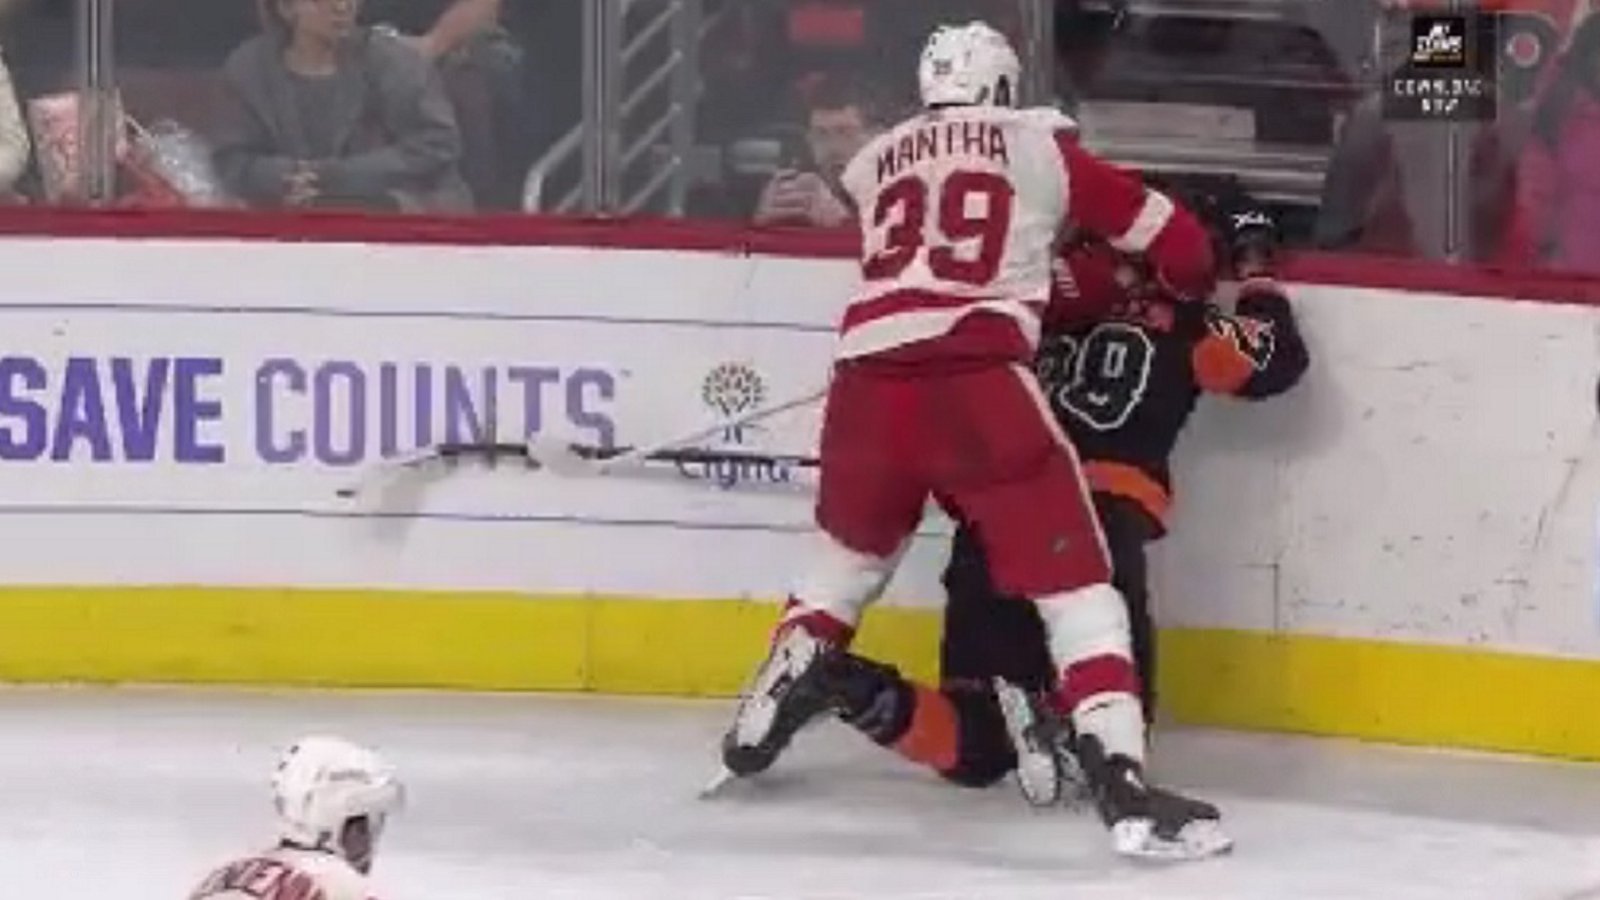 Mantha drills Giroux's head into the boards during Saturday's match up.